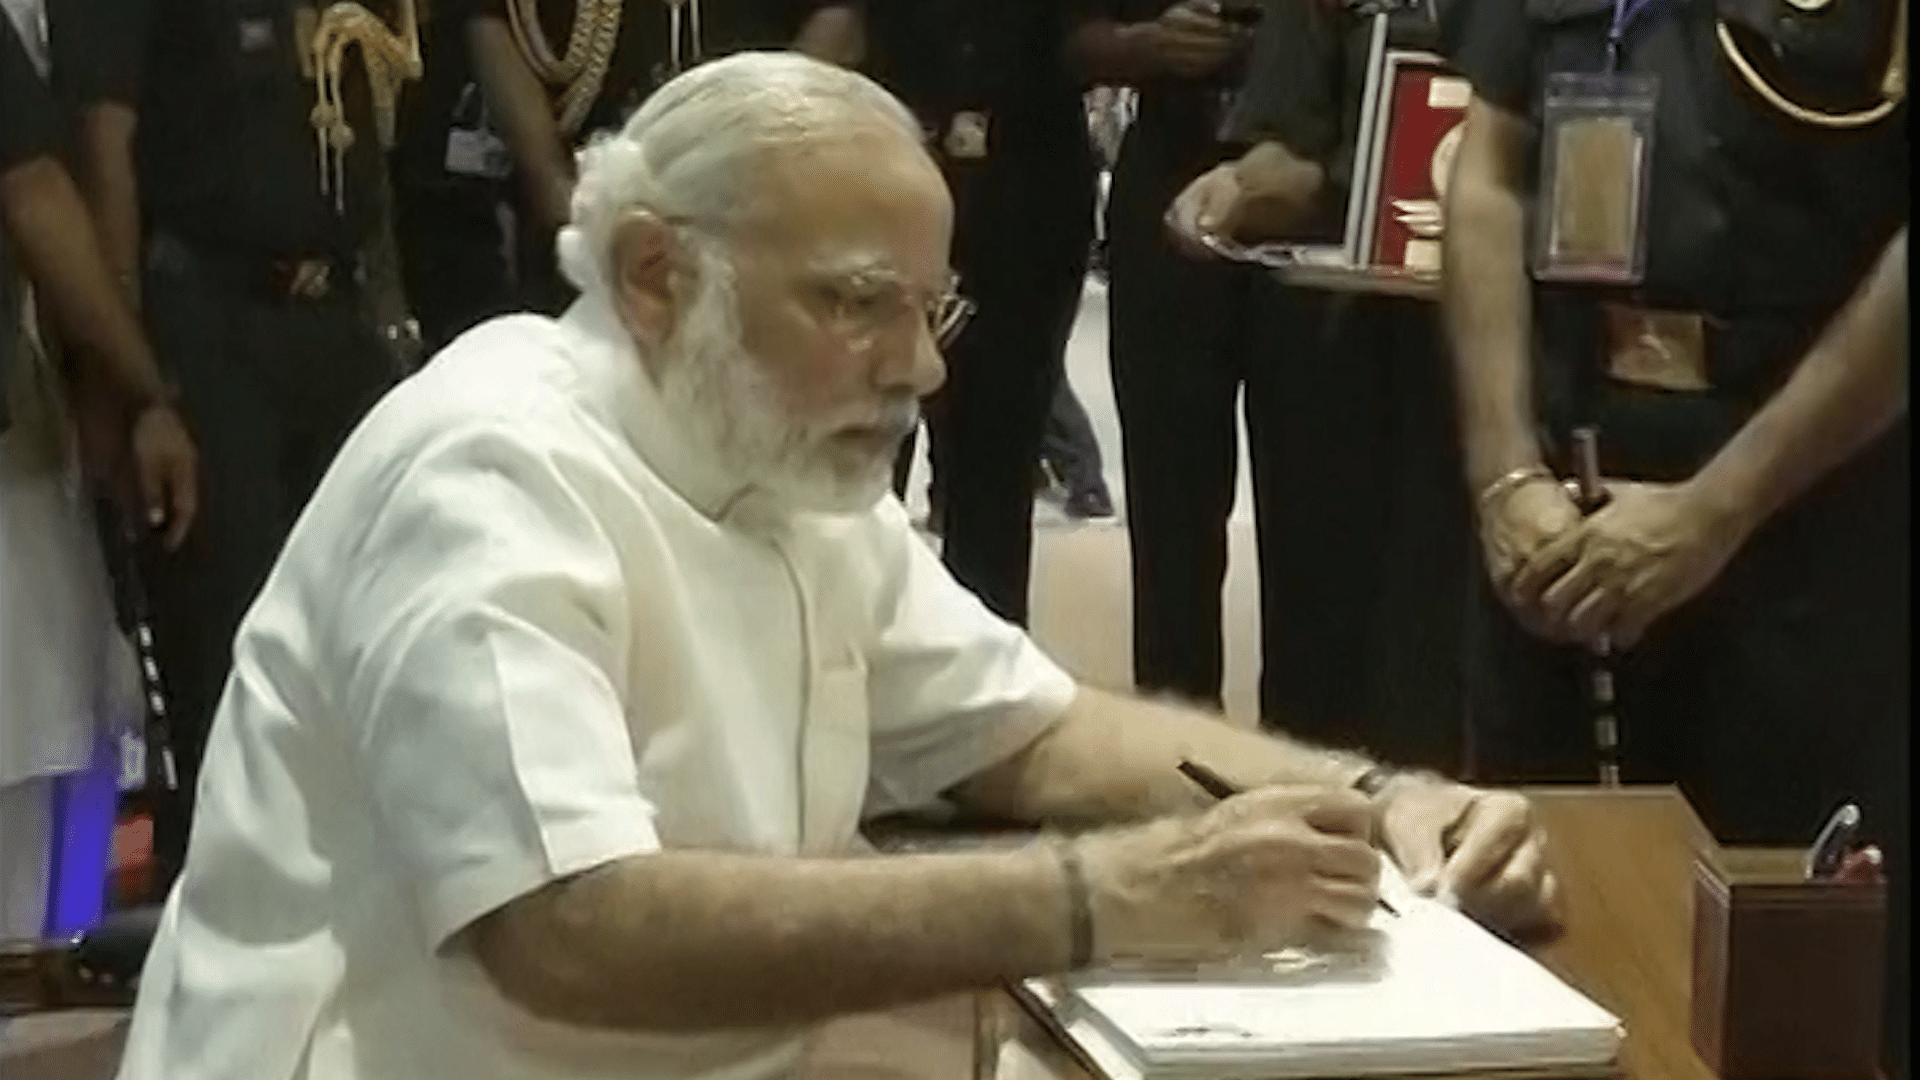 Prime Minister Narendra Modi writing down his thoughts in the visitor’s book at ‘Shauryanjali’ in New Delhi on Thursday. (Photo: ANI screengrab)